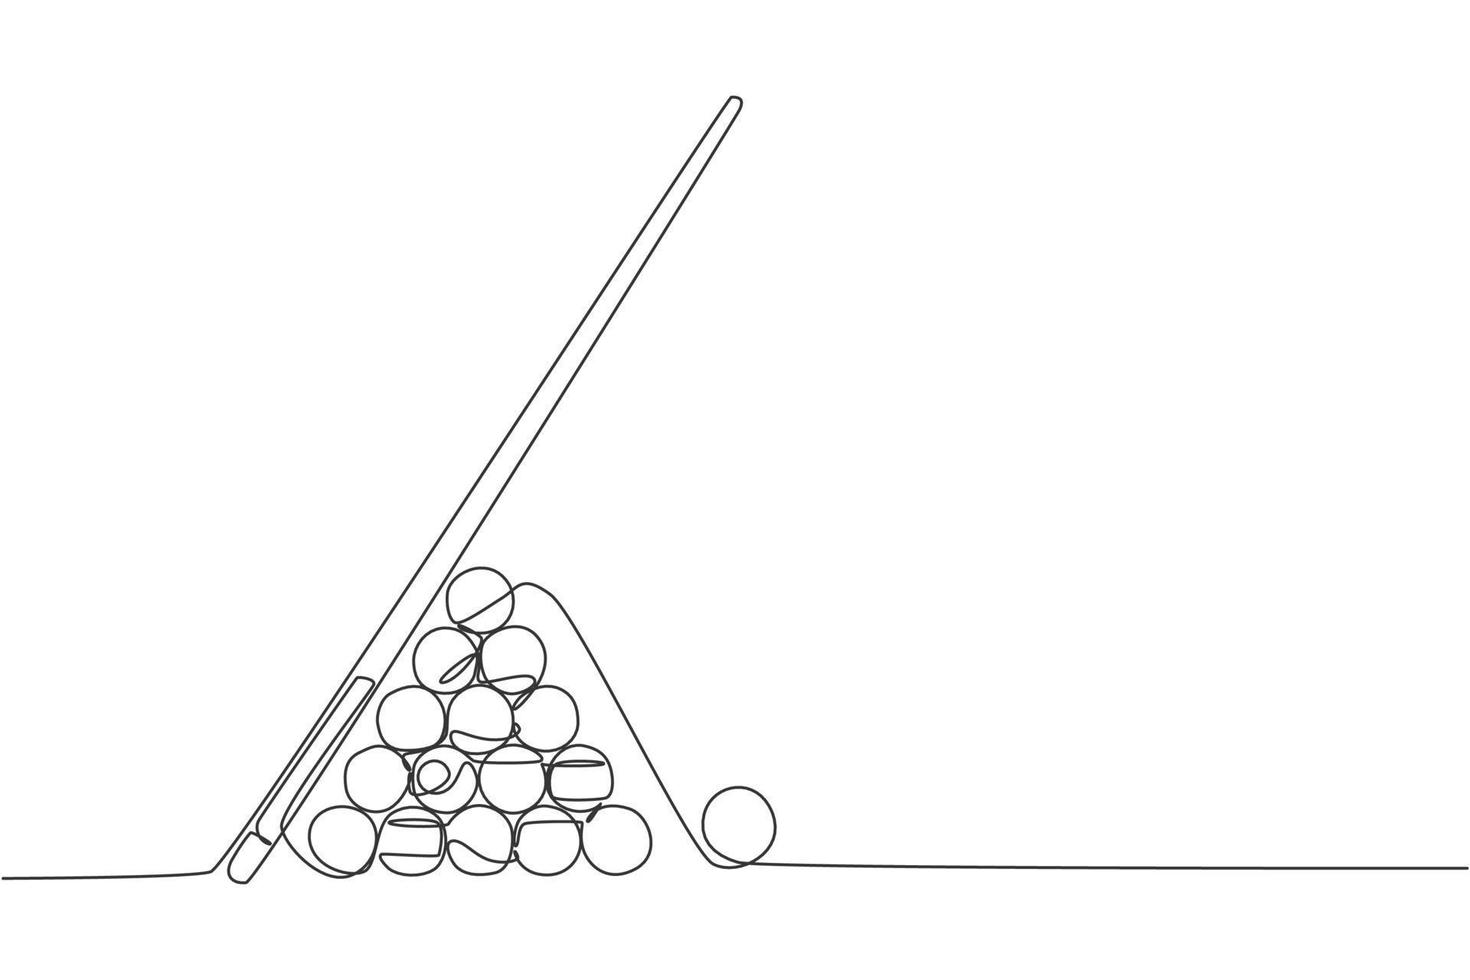 One continuous line drawing of triangle pyramid balls stack for pool billiards game at billiard room. Tournament indoor sport game concept. Dynamic single line draw graphic design vector illustration